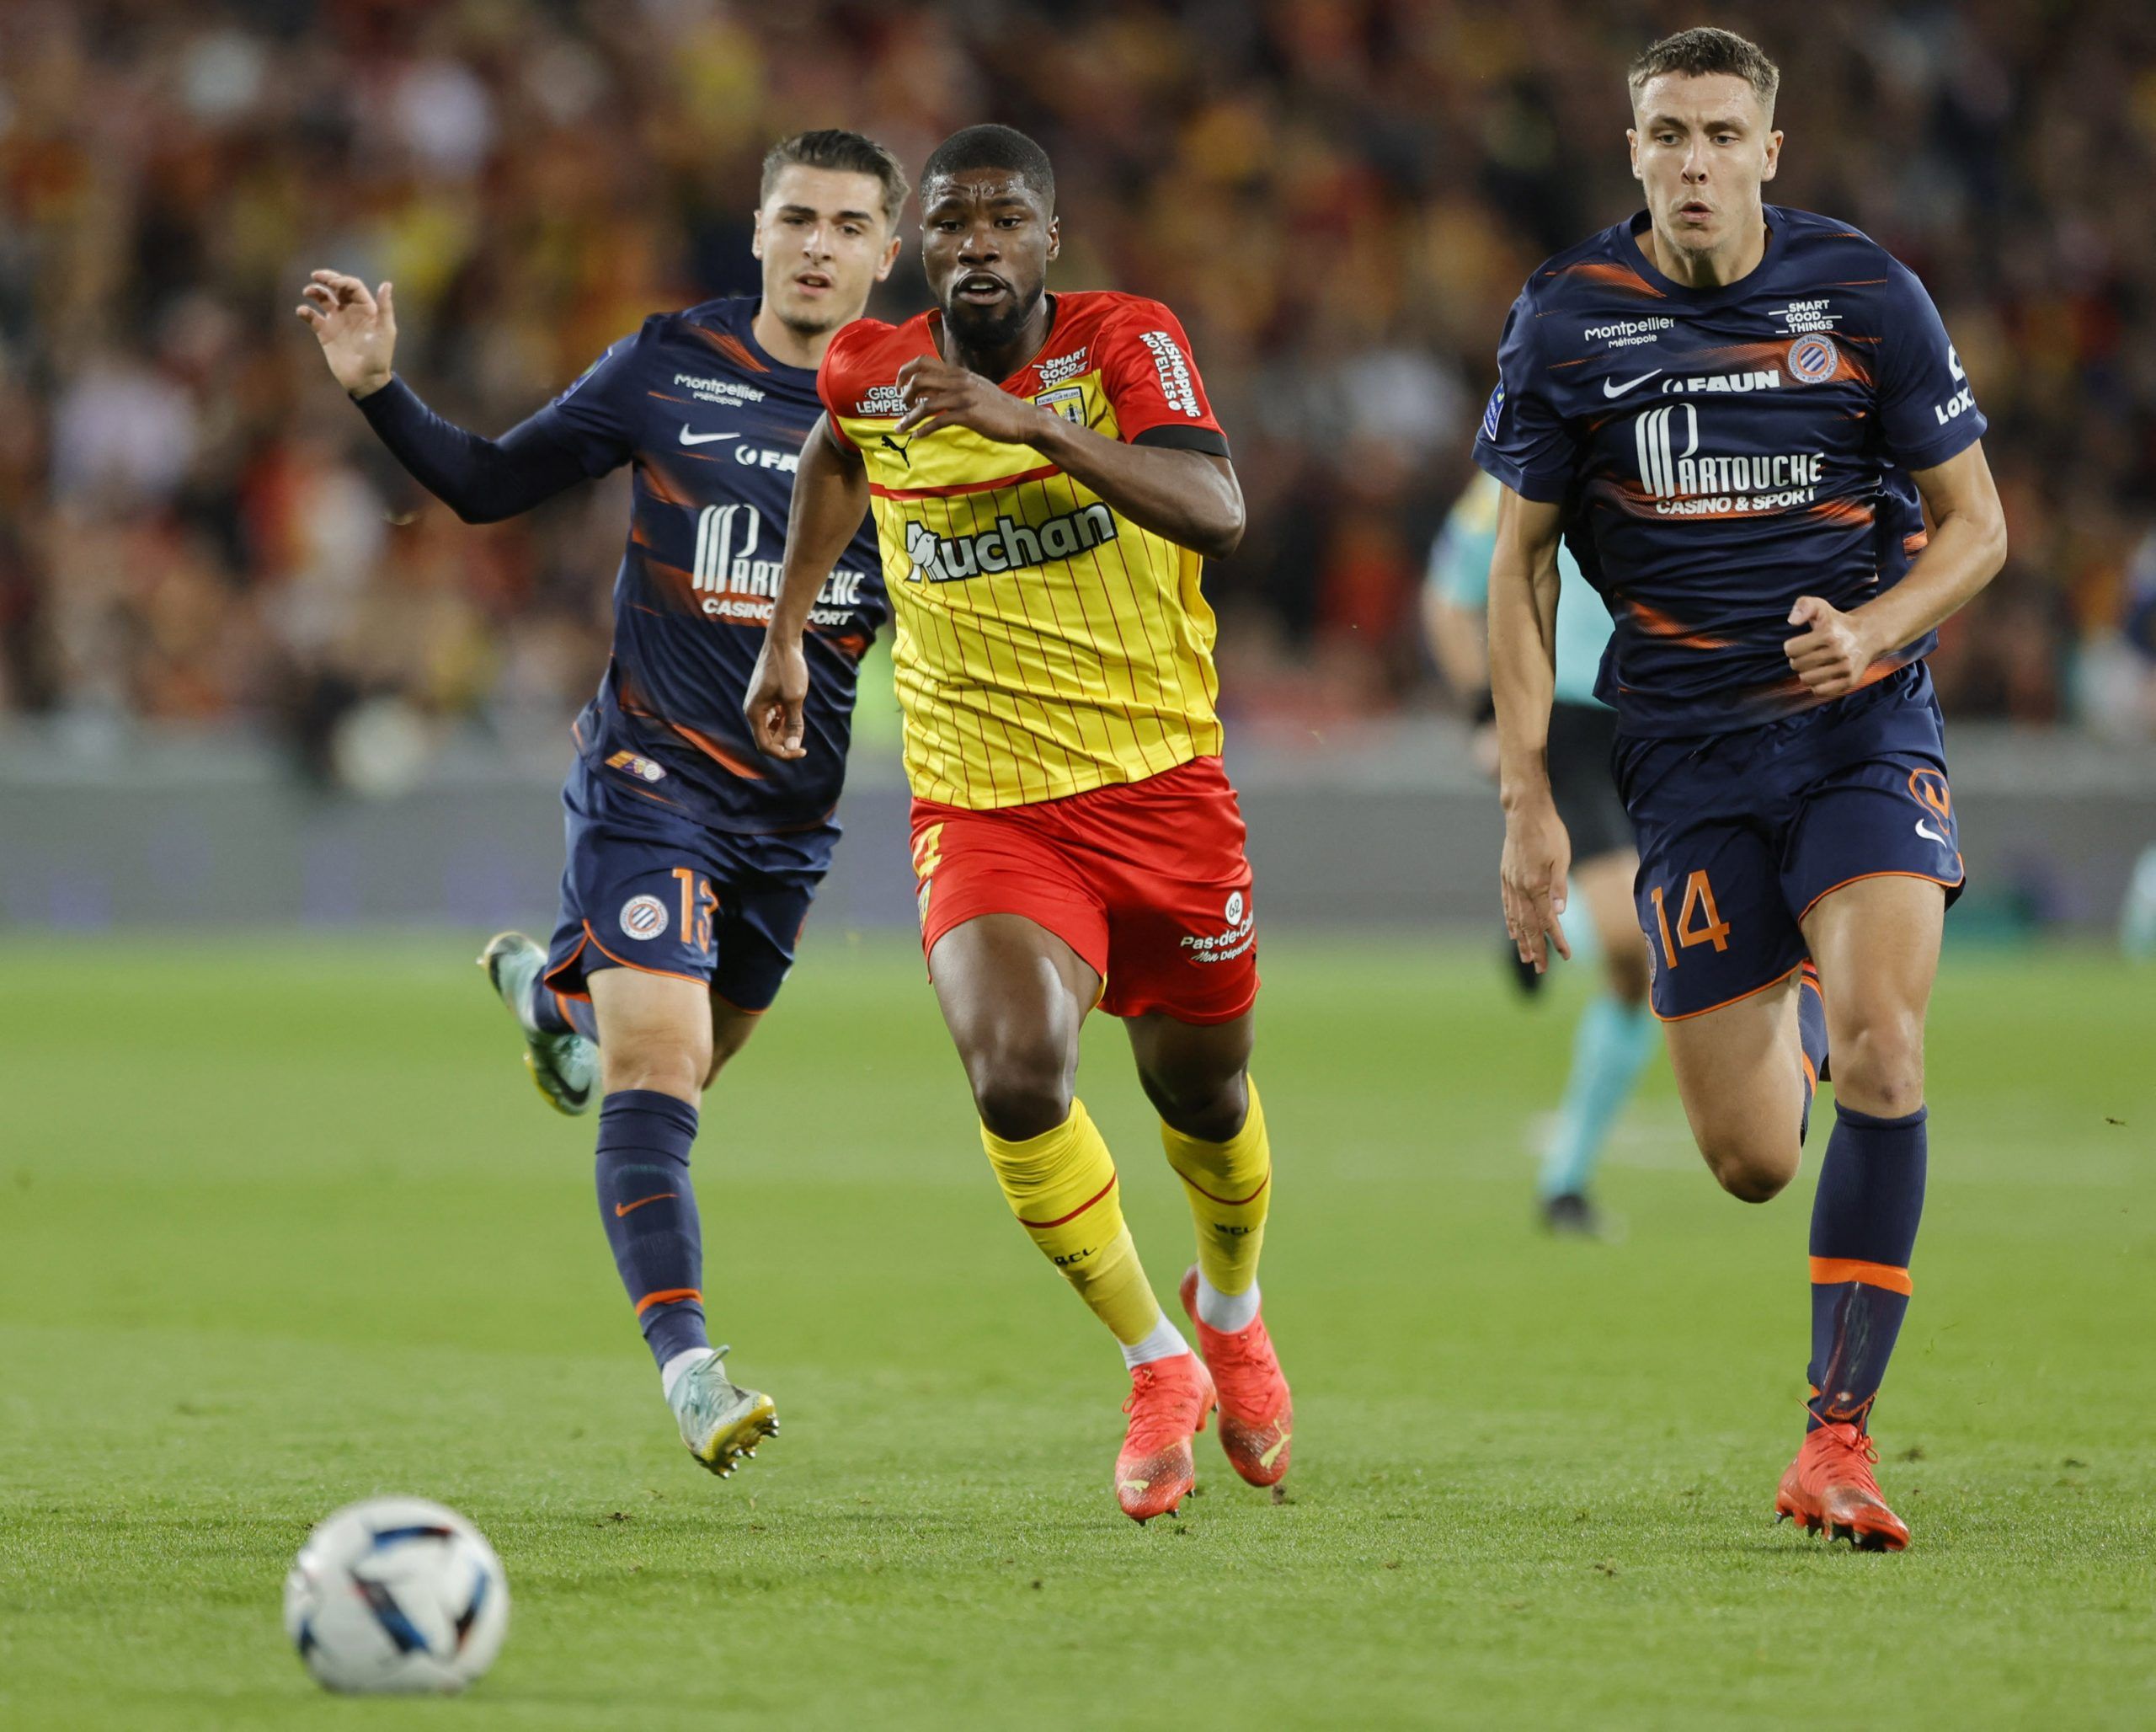 Soccer Football - Ligue 1 - RC Lens v Montpellier - Stade Bollaert-Delelis, Lens, France - October 15, 2022 RC Lens' Kevin Danso in action with Montpellier's Joris Chotard and Maxime Esteve REUTERS/Pascal Rossignol